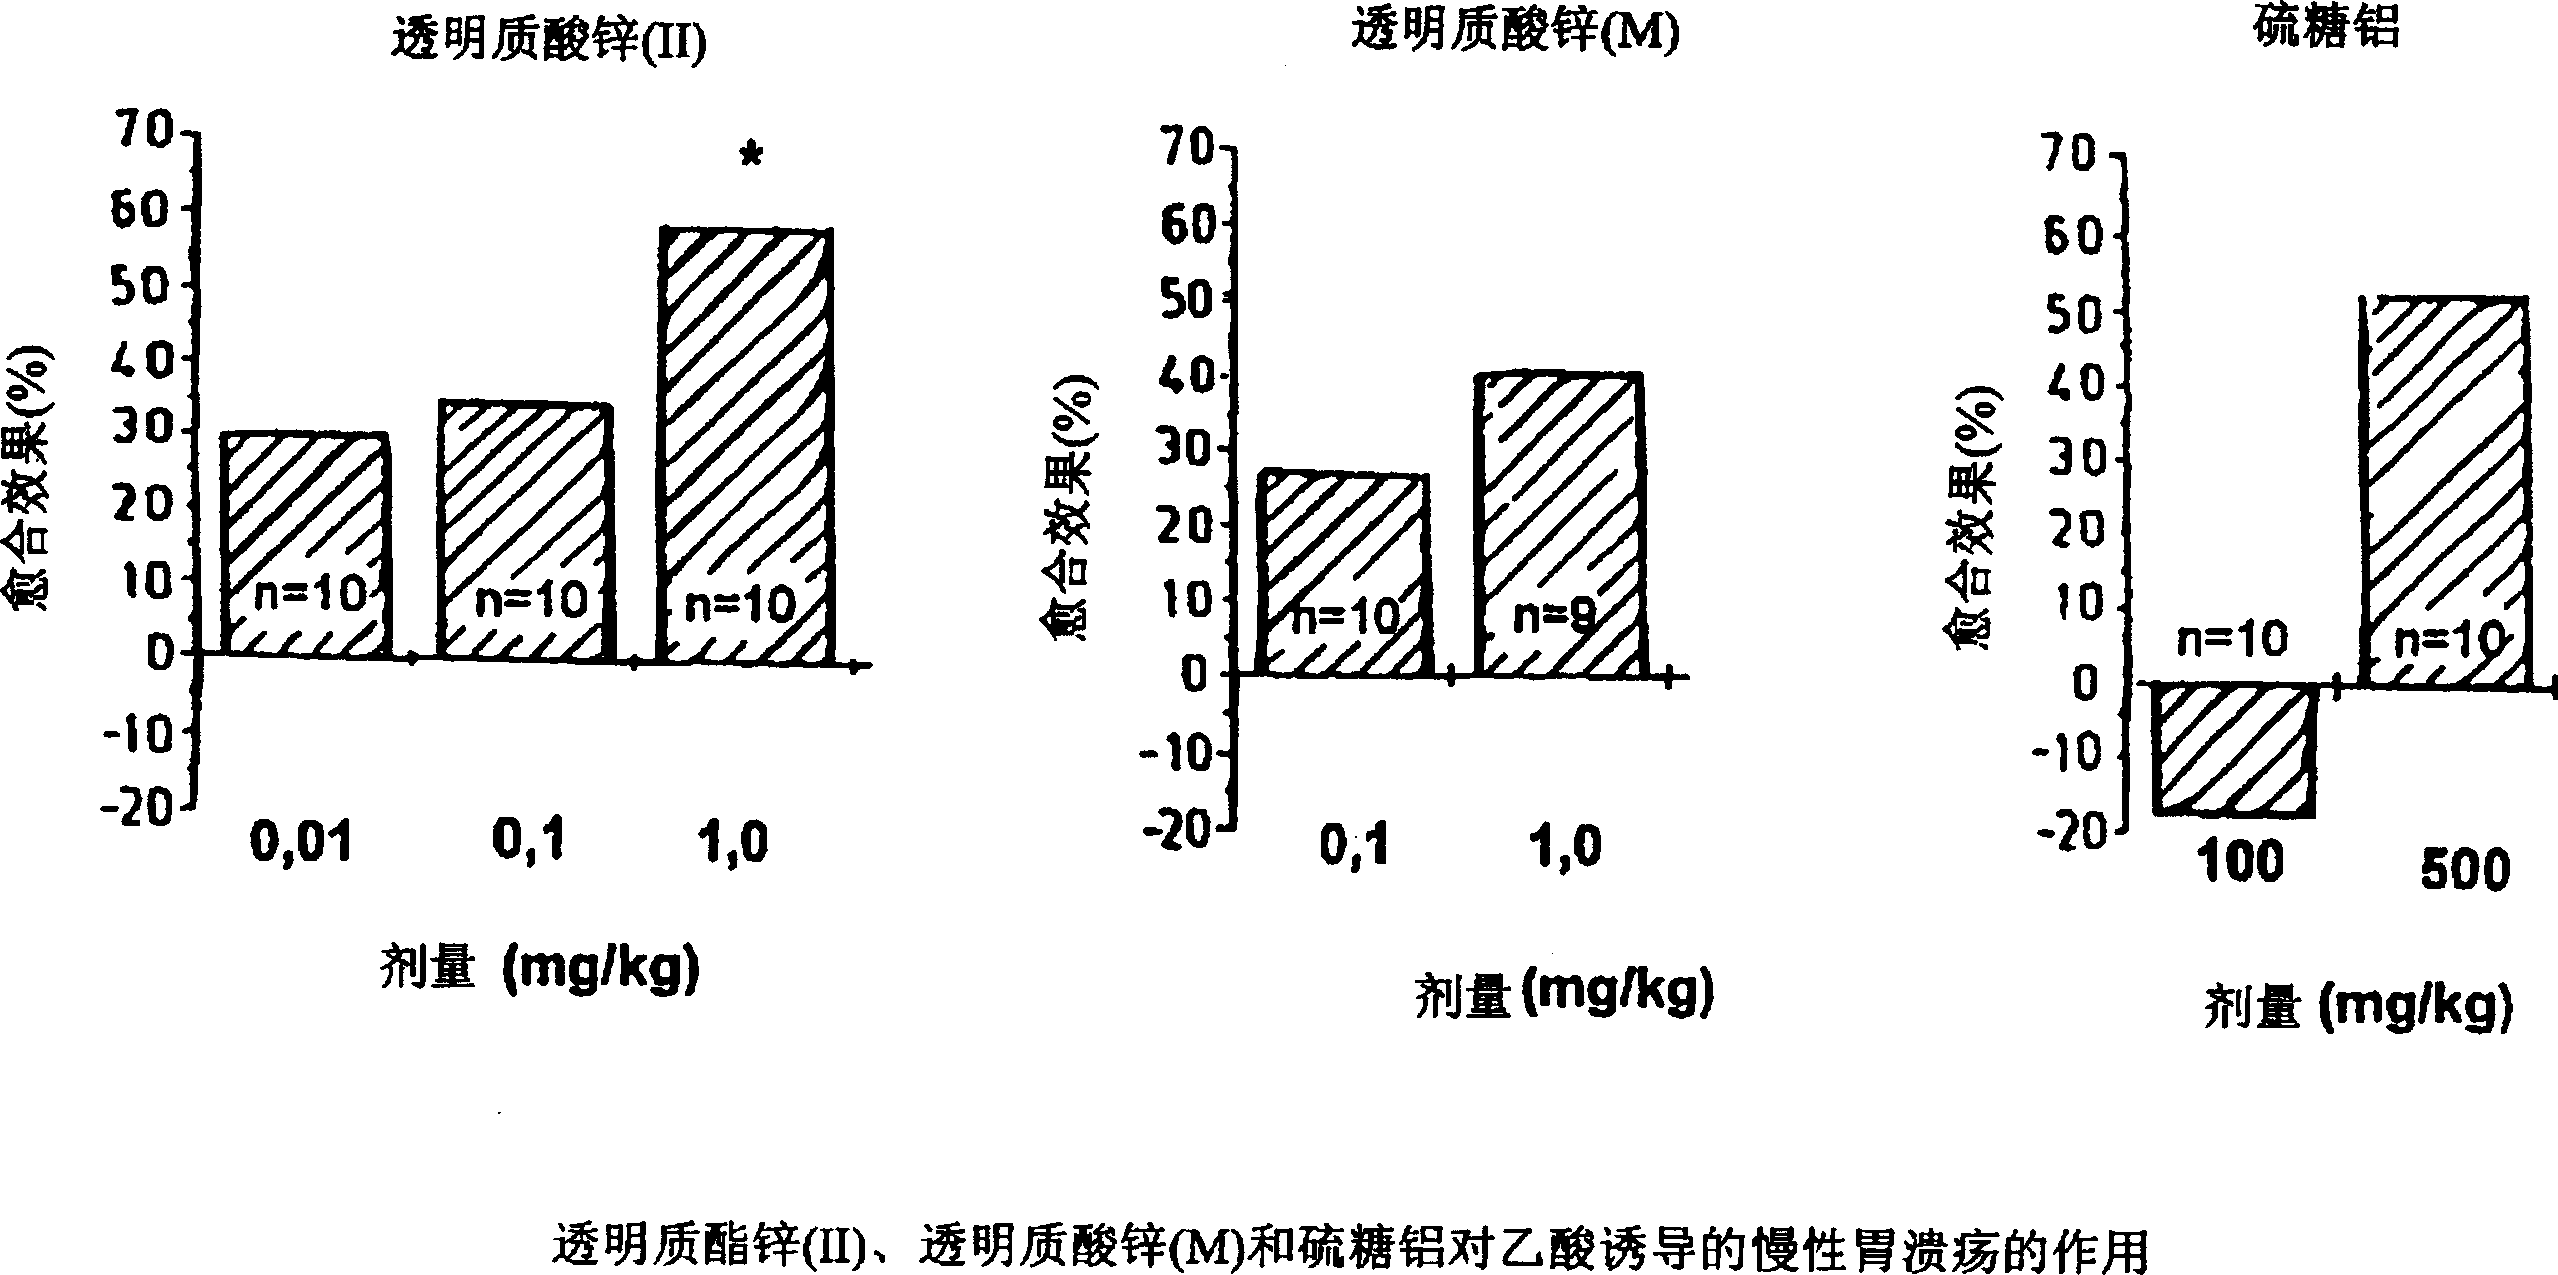 Use of zine hyaluronate against peptic ulcer